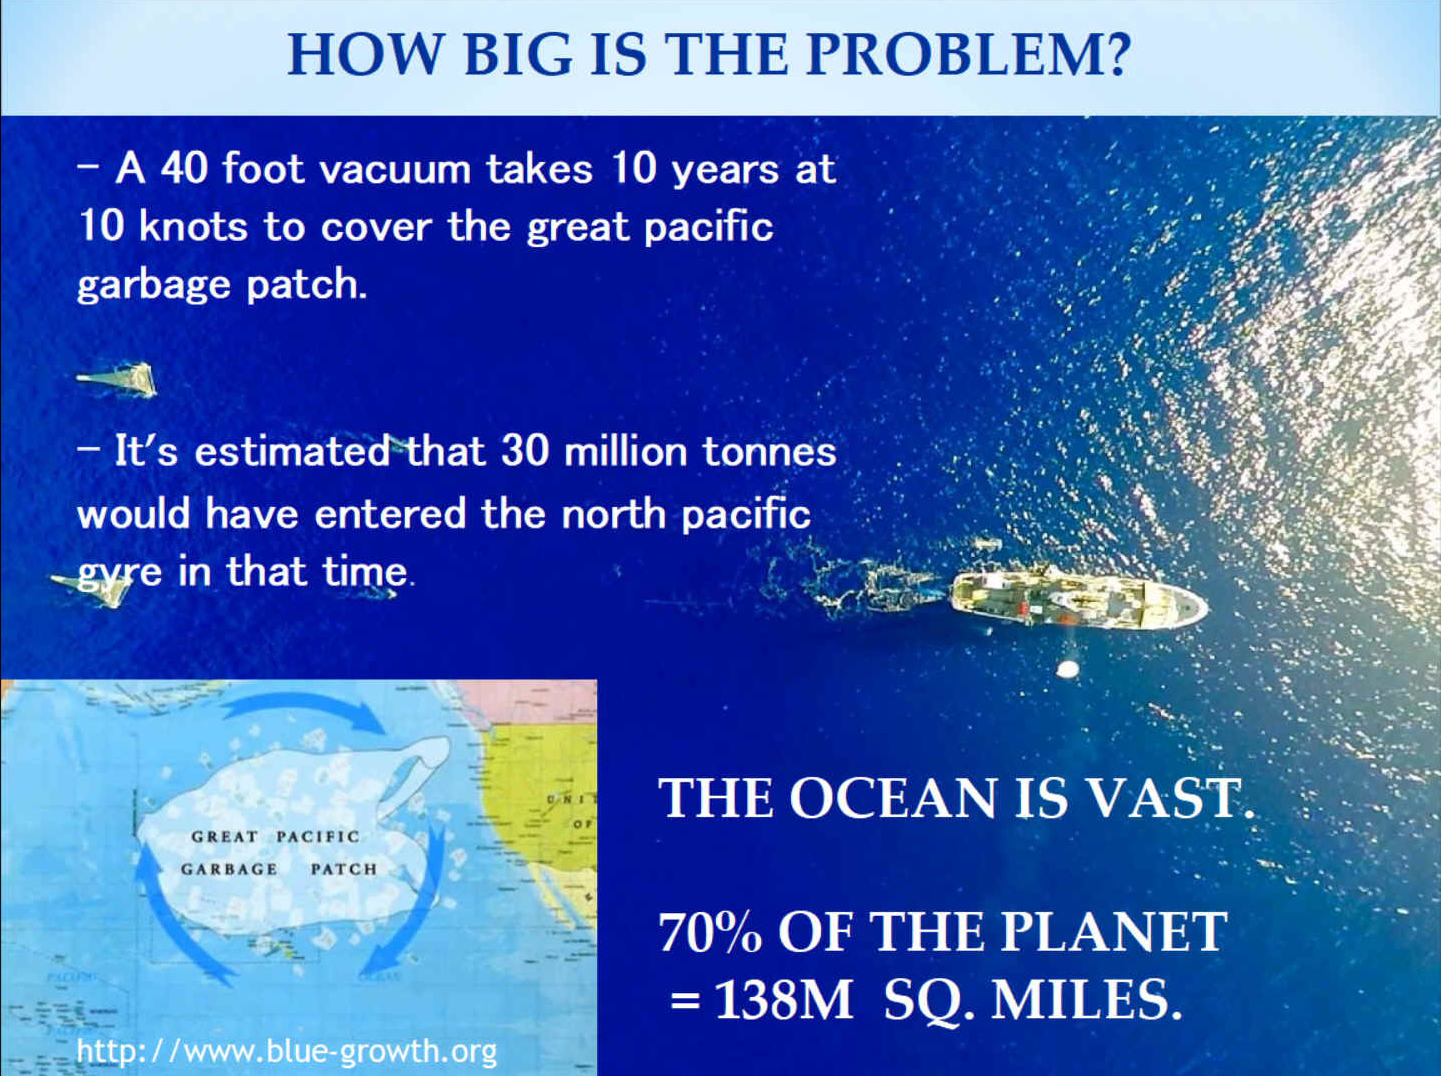 How big is the ocean plastic problem? It's 138 million square miles, or 70% of the earth's suface.